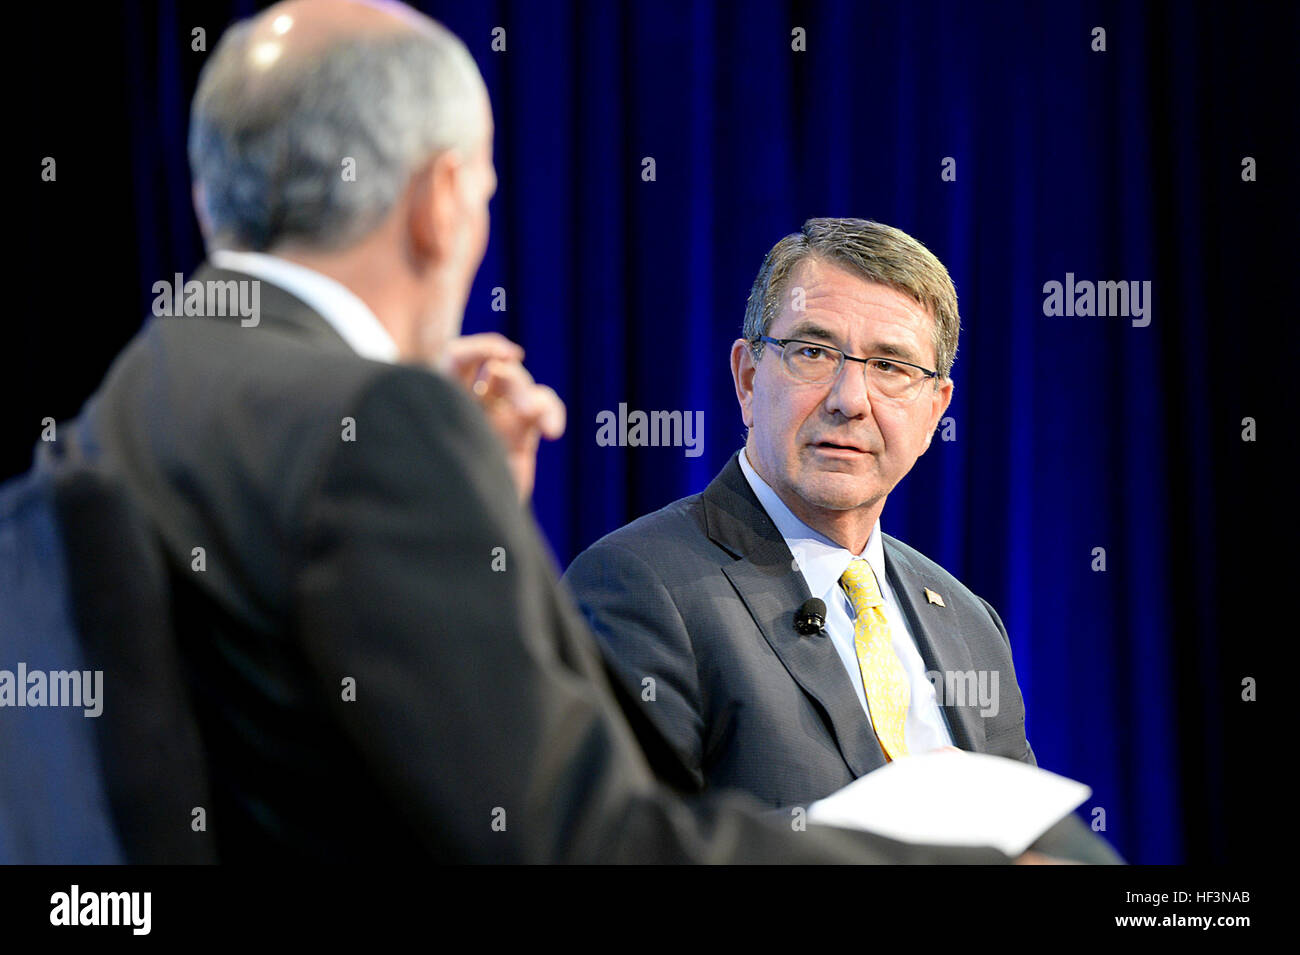 Secretary of Defense Ash Carter provides remarks on global security in the 21st Century at the Wall Street Journal Chief Executive Officer Council annual meeting Nov. 16, 2015. (DoD photo by U.S. Army Sgt. 1st Class Clydell Kinchen) (Released) Secretary of defense provides remarks on global security in the 21st Century at the Wall Street Journal Chief Executive Officer Council annual meeting 151116-D-LN567-041 Stock Photo